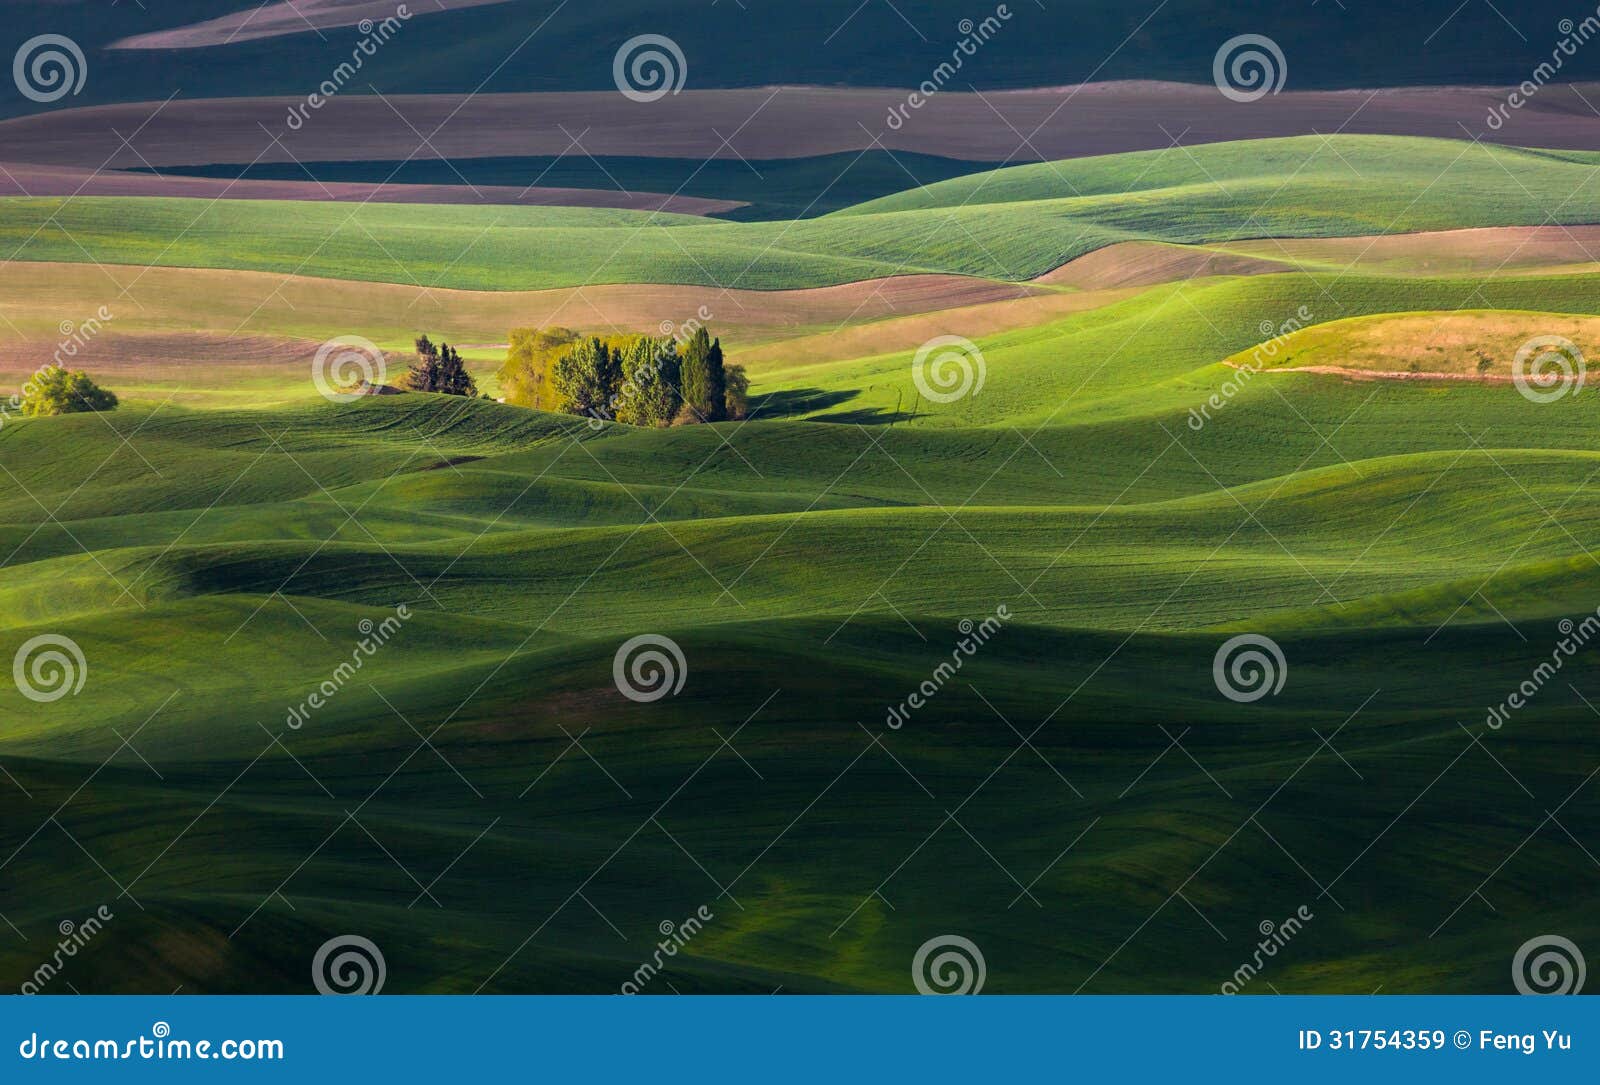 rolling hill and farm land